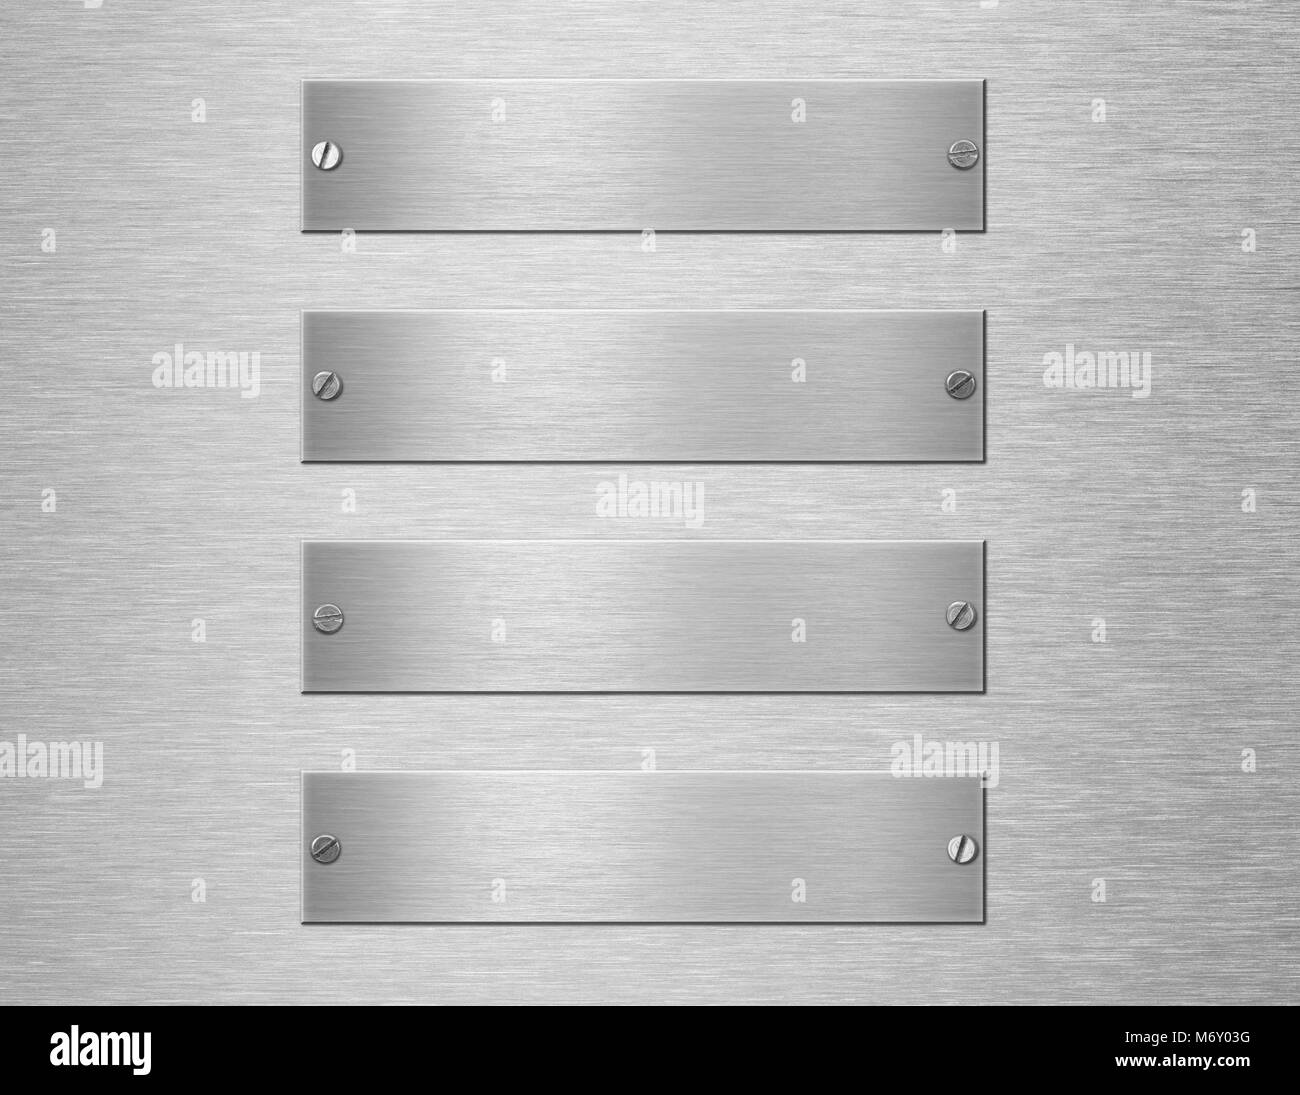 plates or nameboards on metal wall with rivets isolated on white Stock Photo